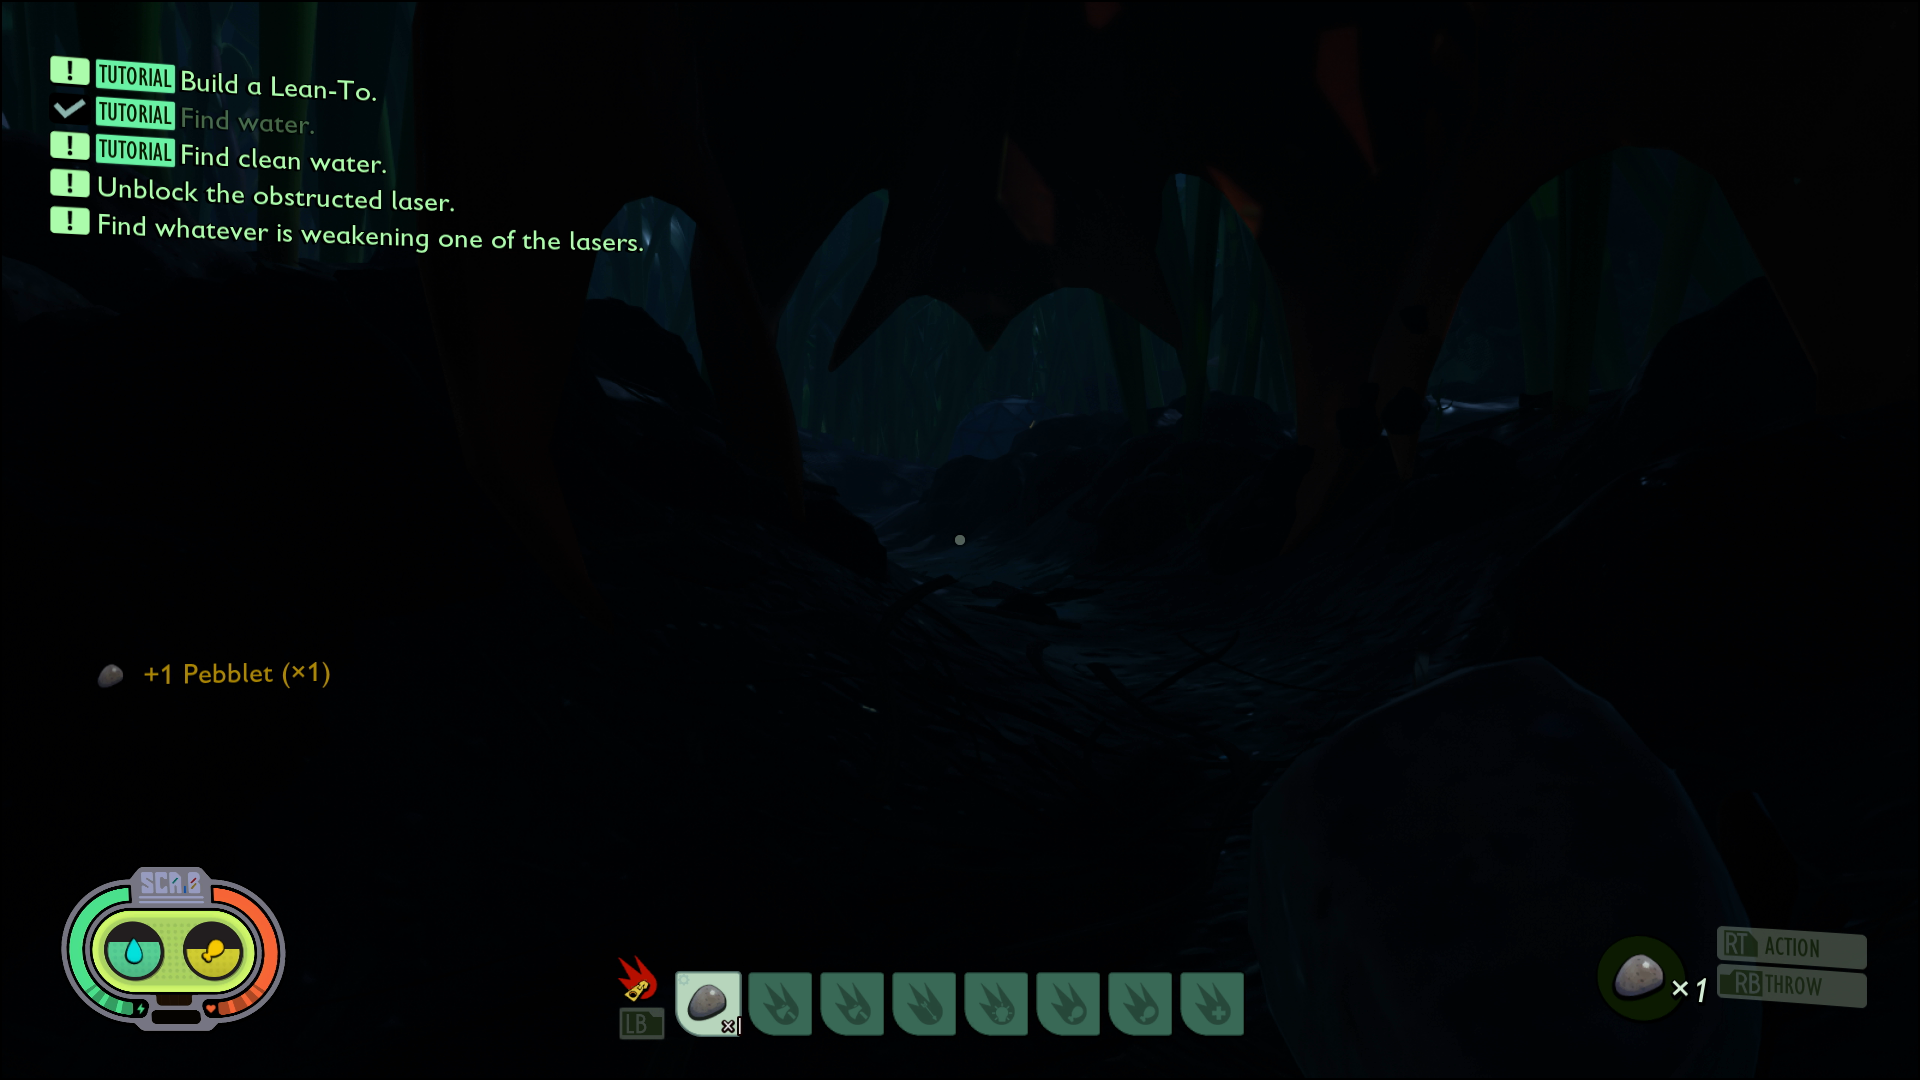 The player is in a dark cave in Grounded. A list of tasks is in the upper-left corner. Outstanding tasks are listed with an exclamation point beside them. Finished tasks have a check mark. Tutorial tasks are marked "tutorial." The tasks are build a lean-to, find water, find clean water, unblock the obstructed laser, and find whatever is weakening one of the lasers.